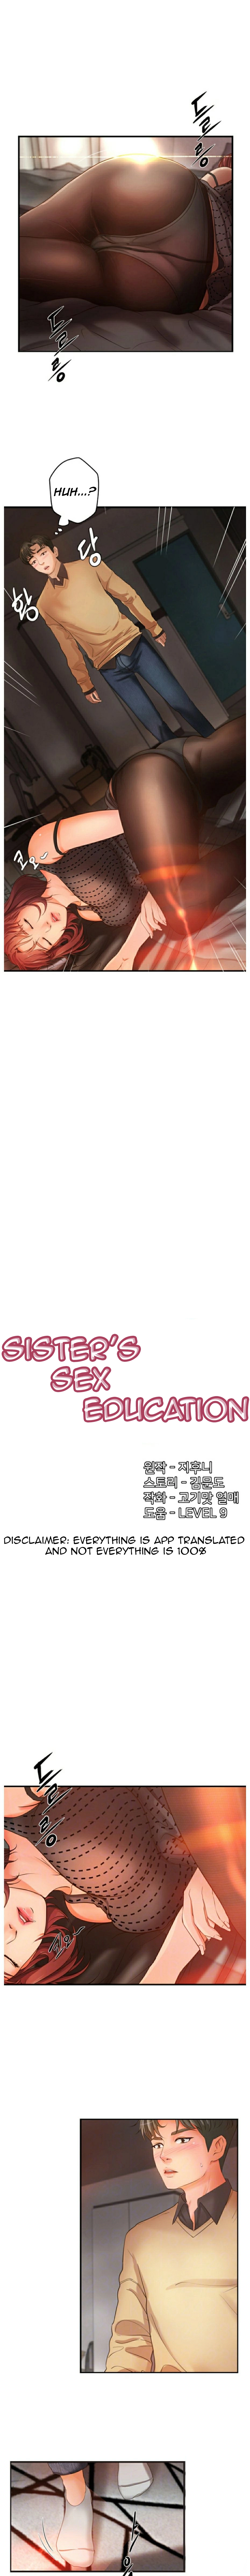 Sister’s Sex Education - Chapter 4 Page 2